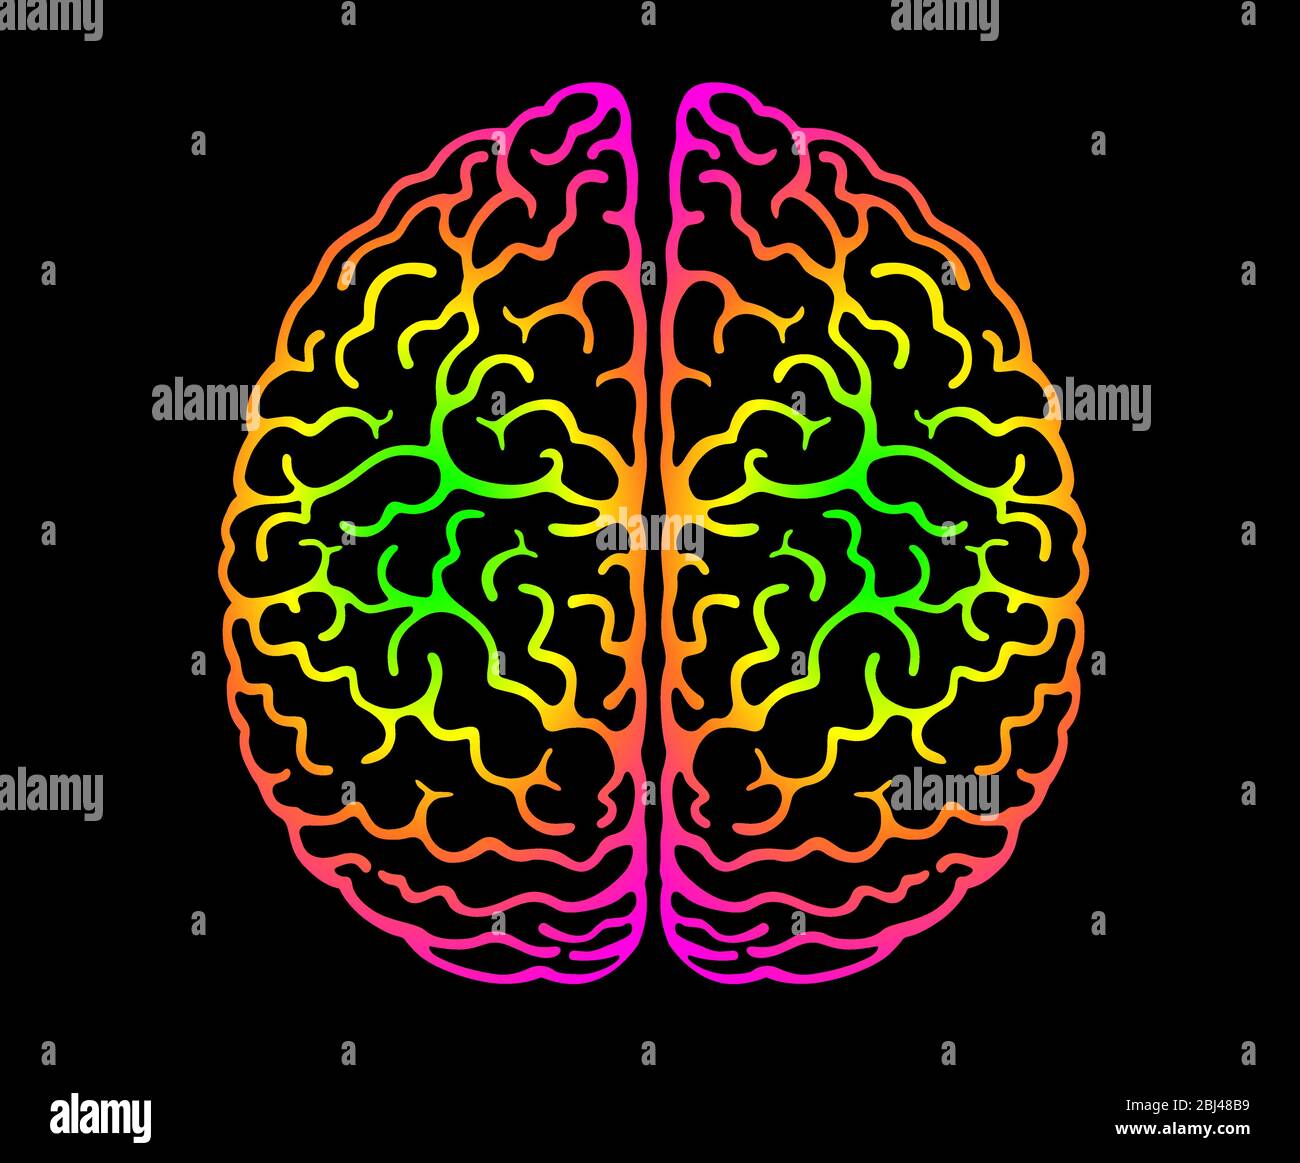 Human Brain. Bright Colors Black Background. Cerebral Hemispheres, Convolutions Of The Mind Brain, Brain's Bends. View From Above, Front View, Realist Stock Vector